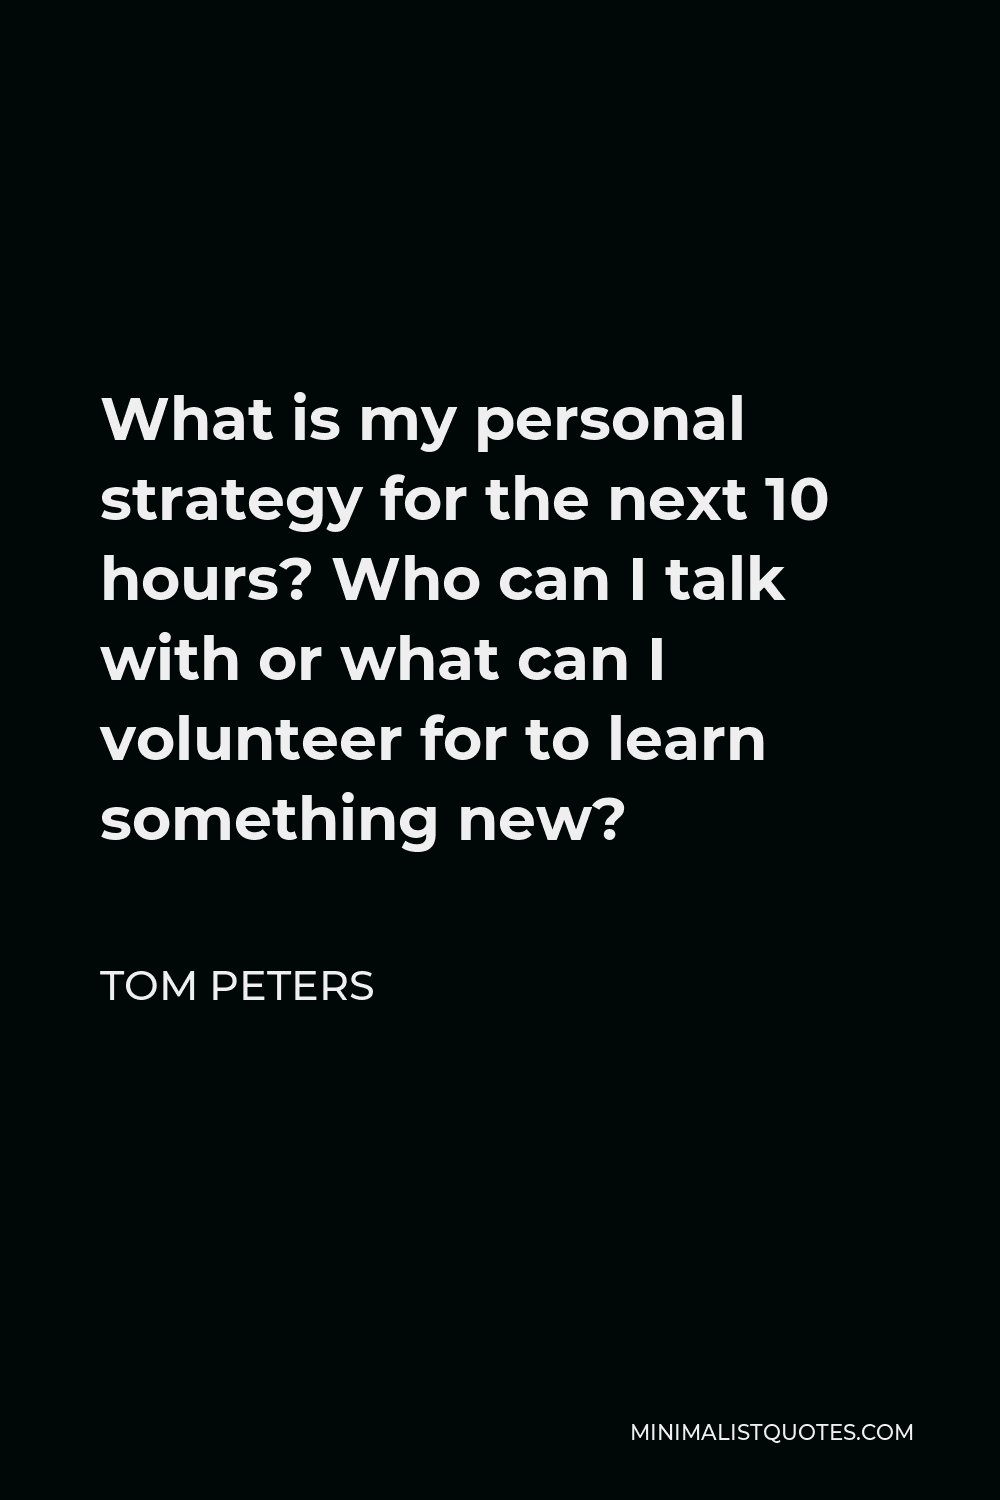 Tom Peters Quote - What is my personal strategy for the next 10 hours? Who can I talk with or what can I volunteer for to learn something new?